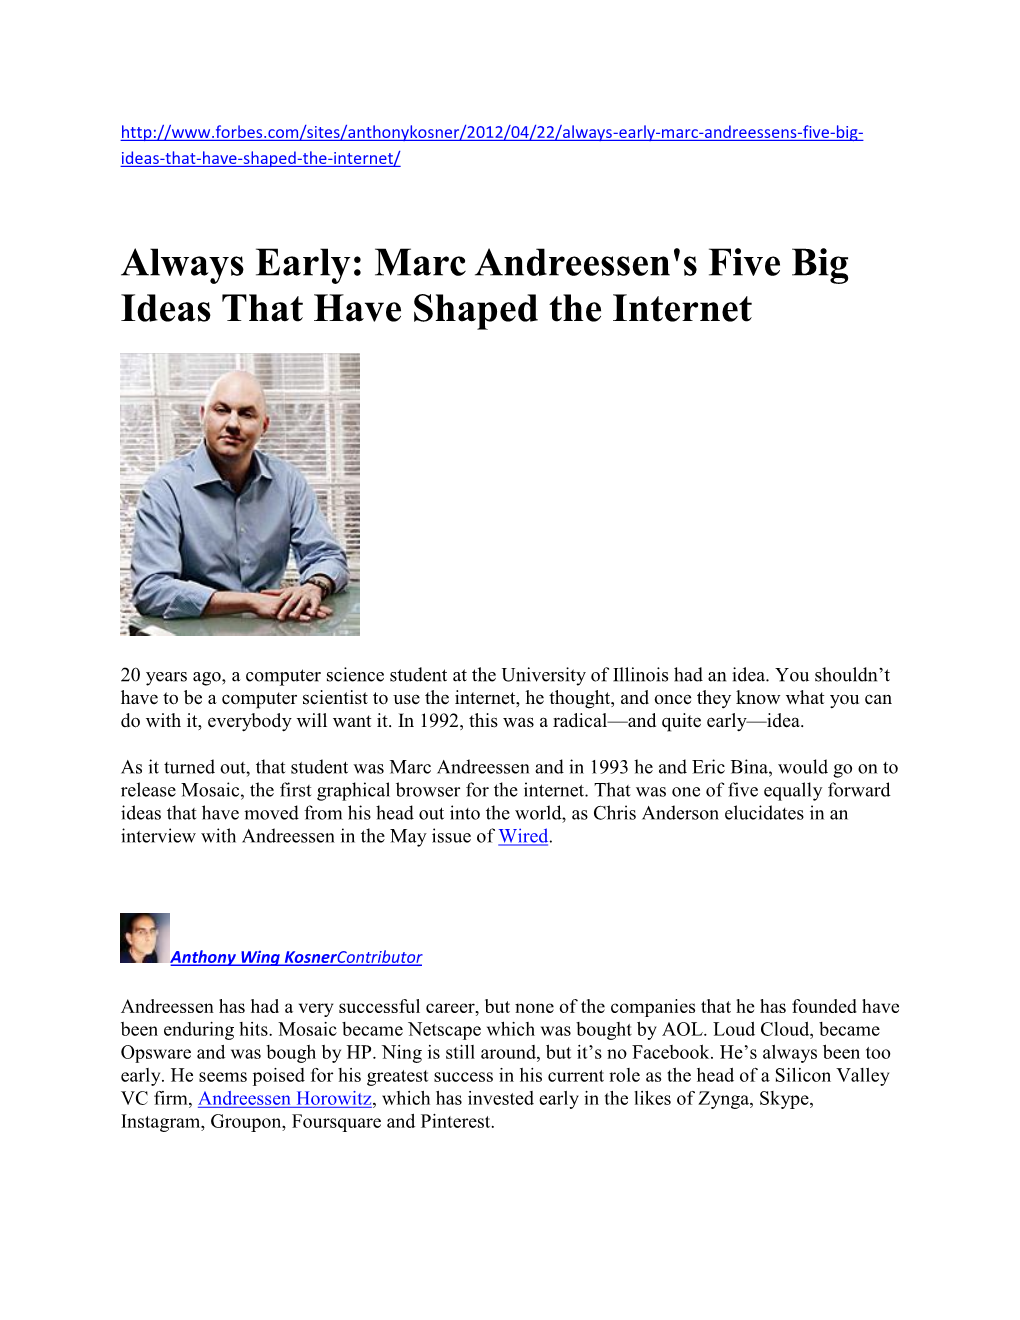 Marc Andreessen's Five Big Ideas That Have Shaped the Internet